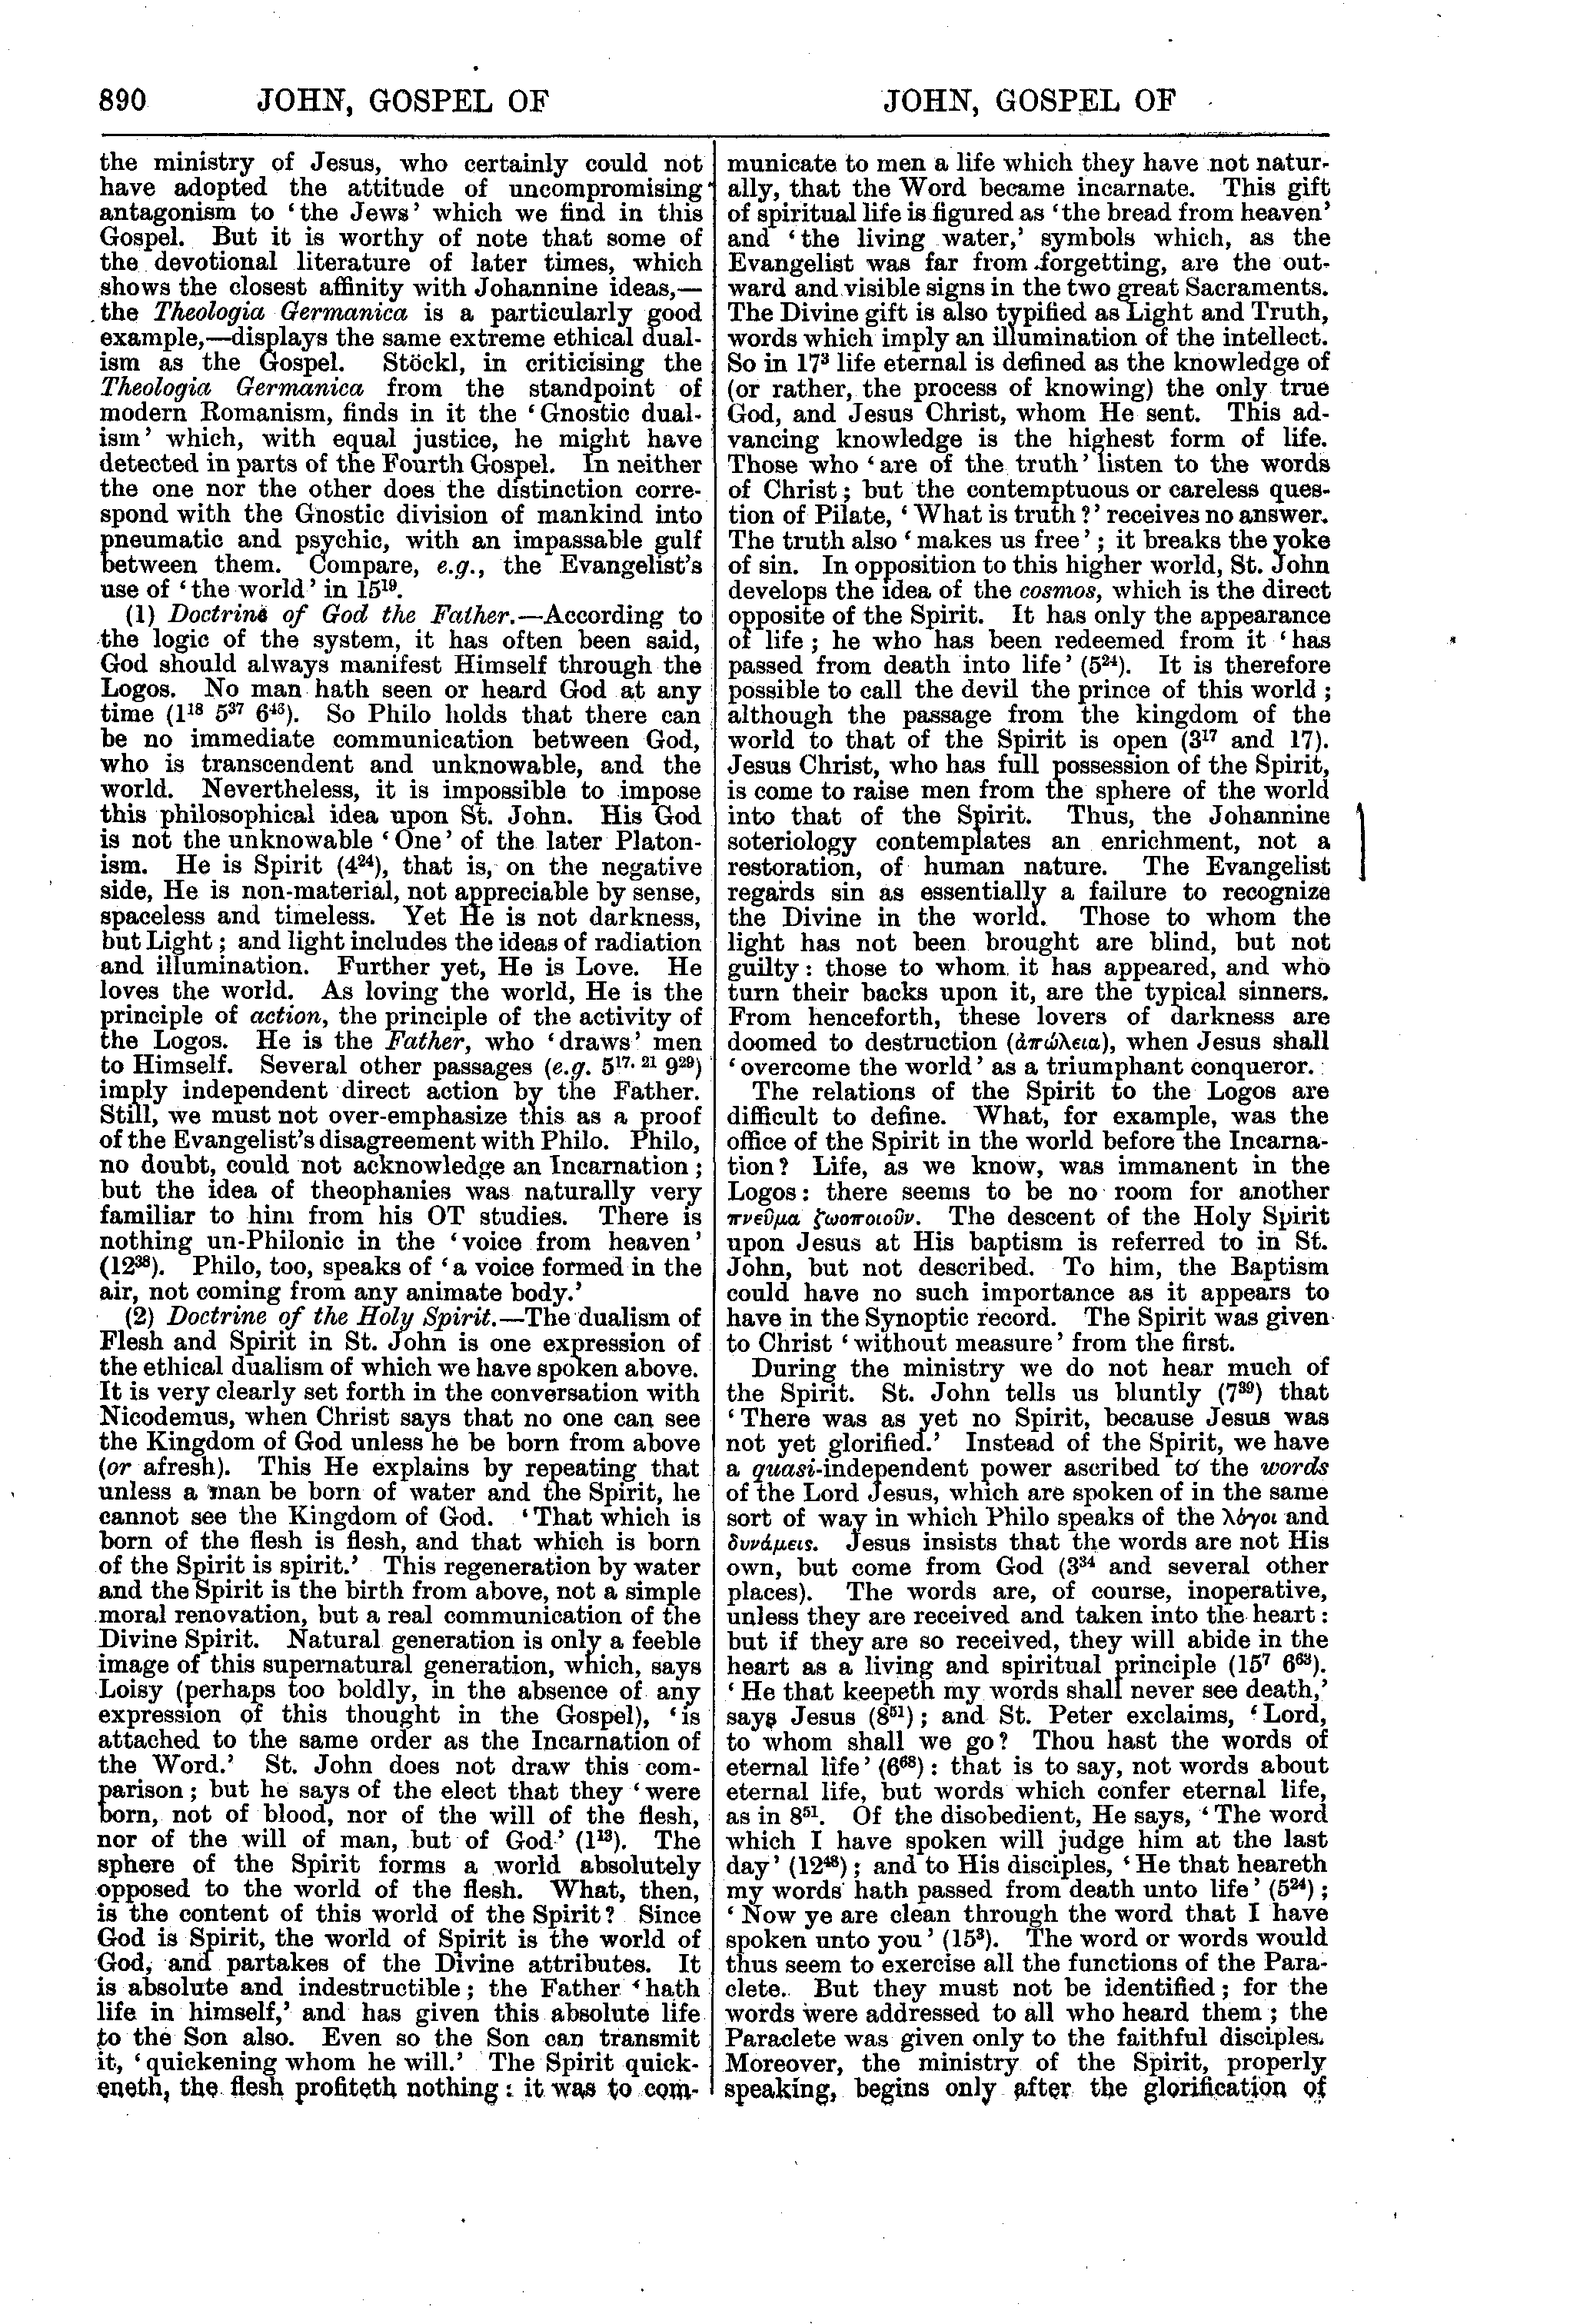 Image of page 890